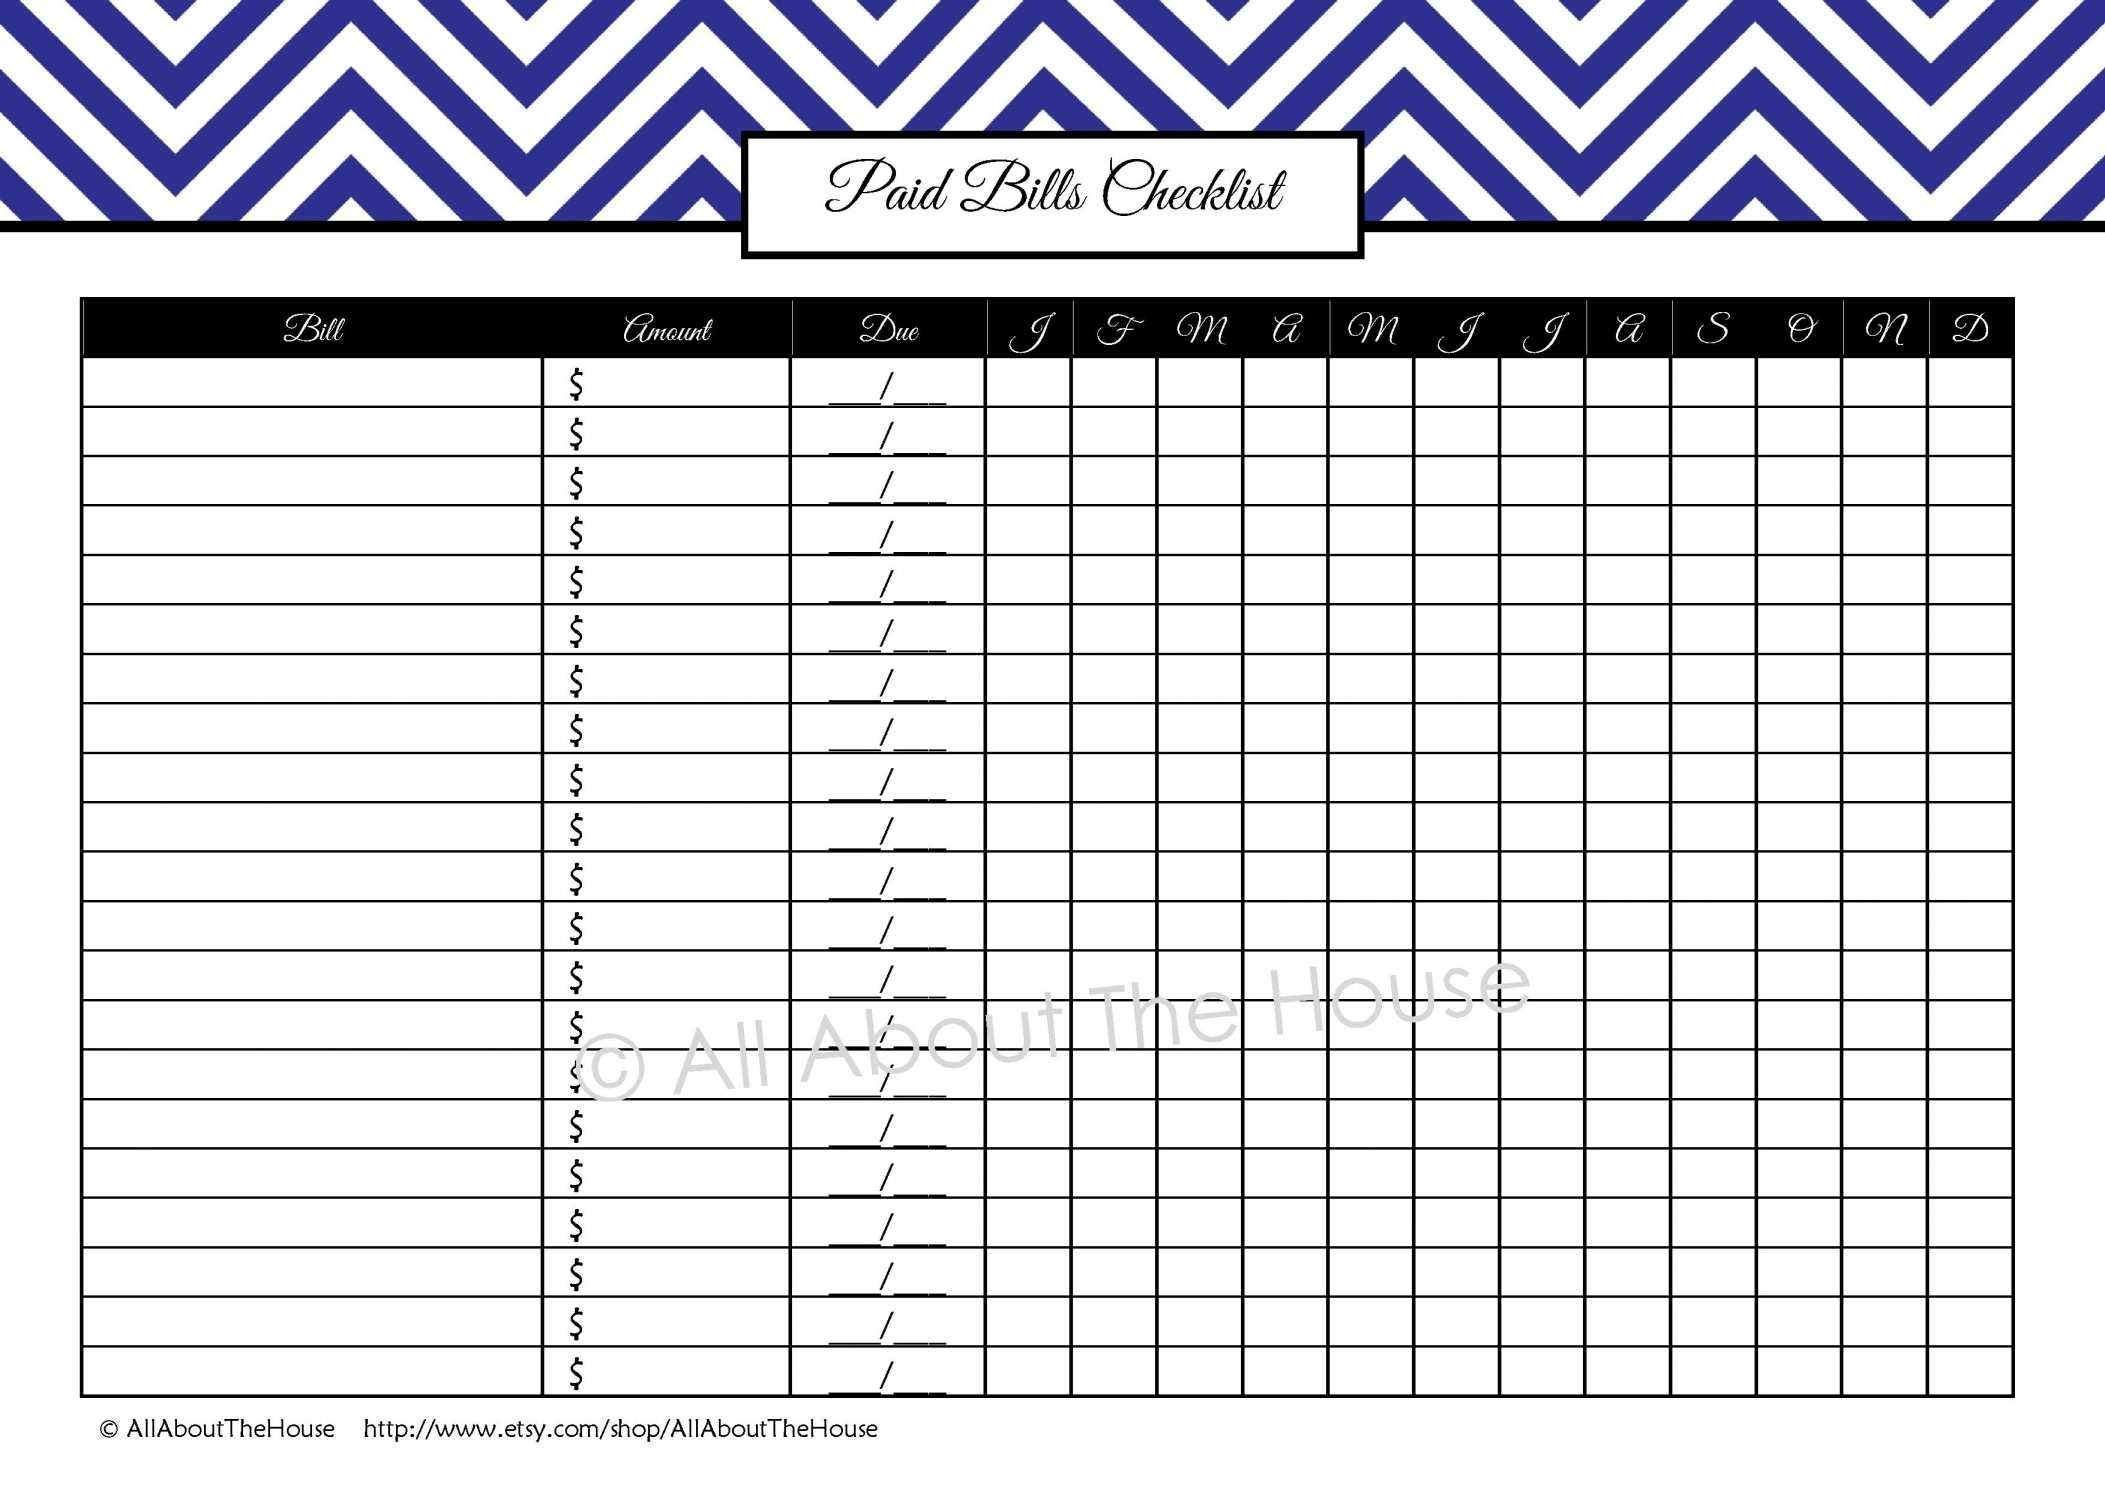 Free Printable Monthly Bill Tracker  Template Calendar Design with regard to Monthly Bill Template Free Printable